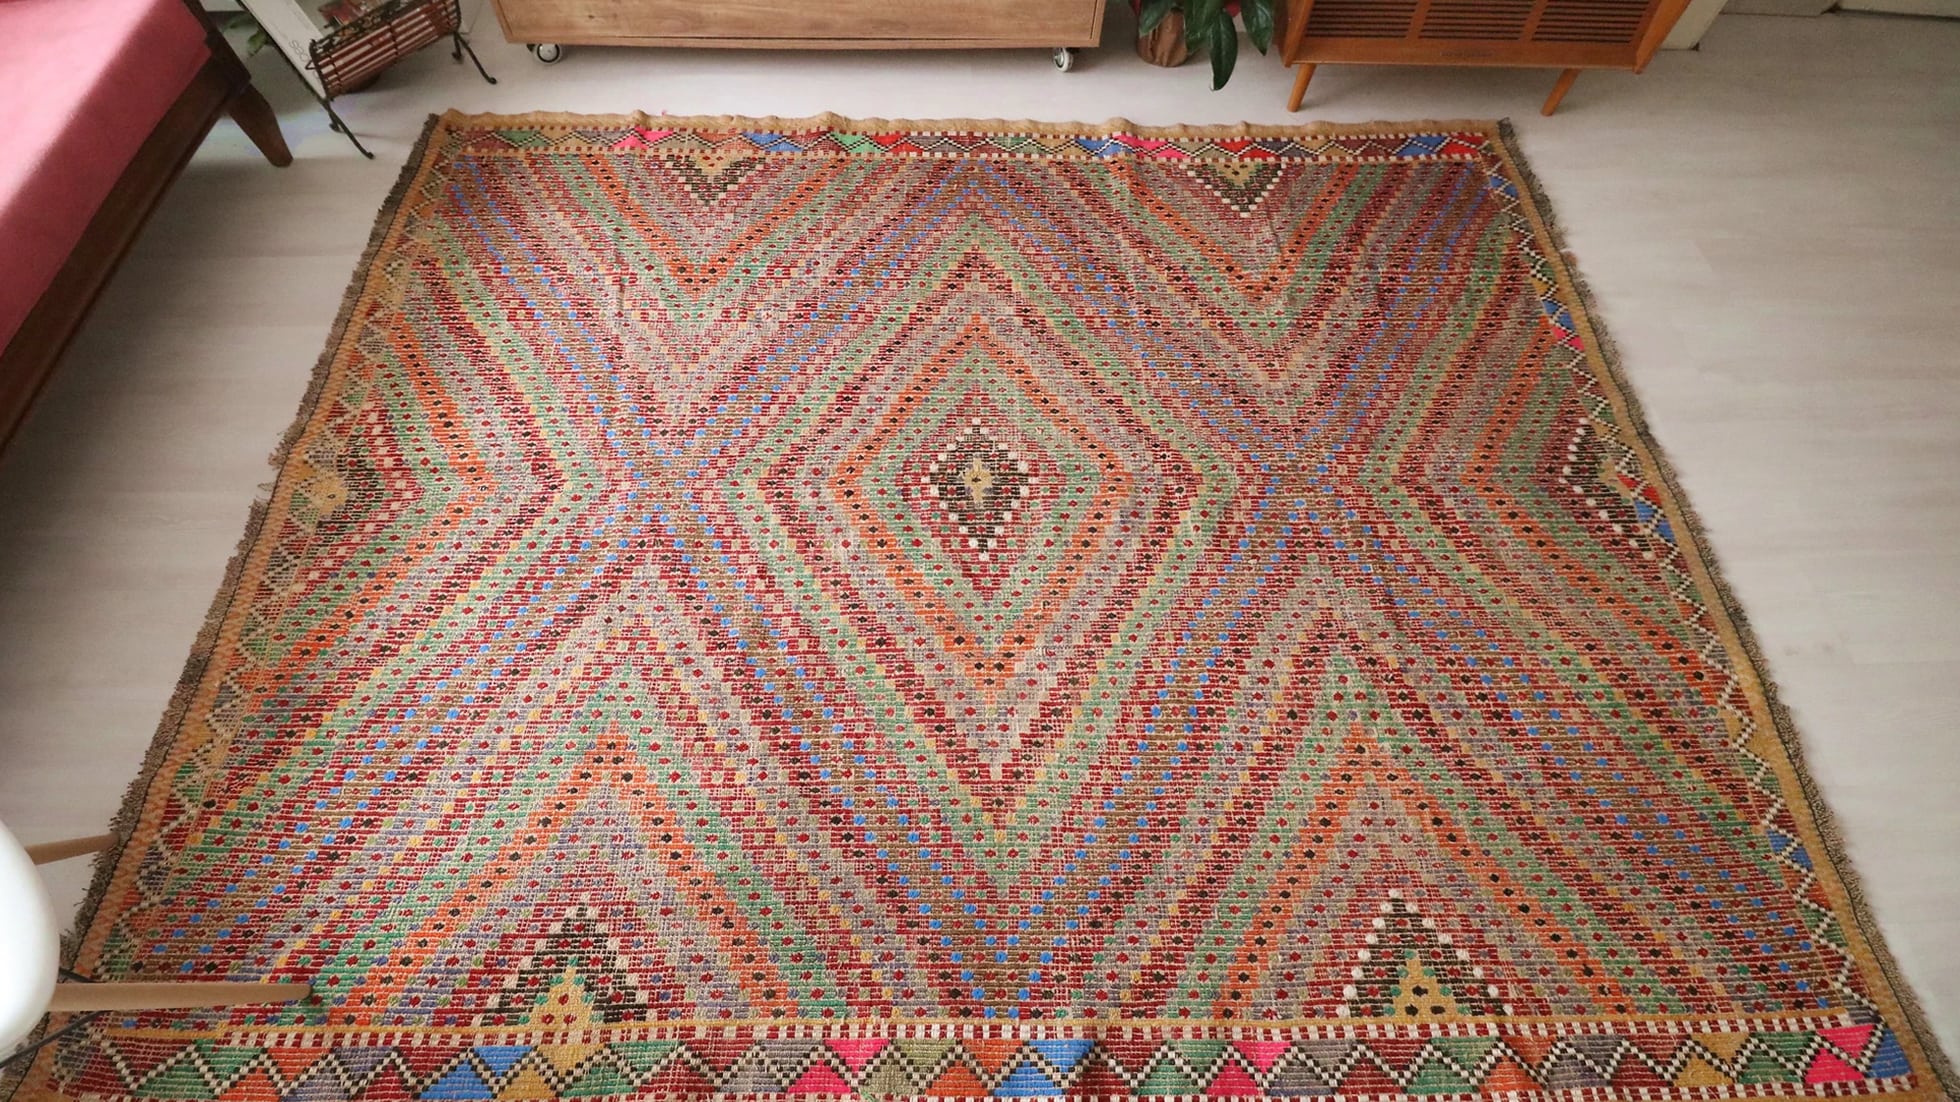 muted hand-knotted vintage Soumak Turkish Kilim Rug in earthy tones